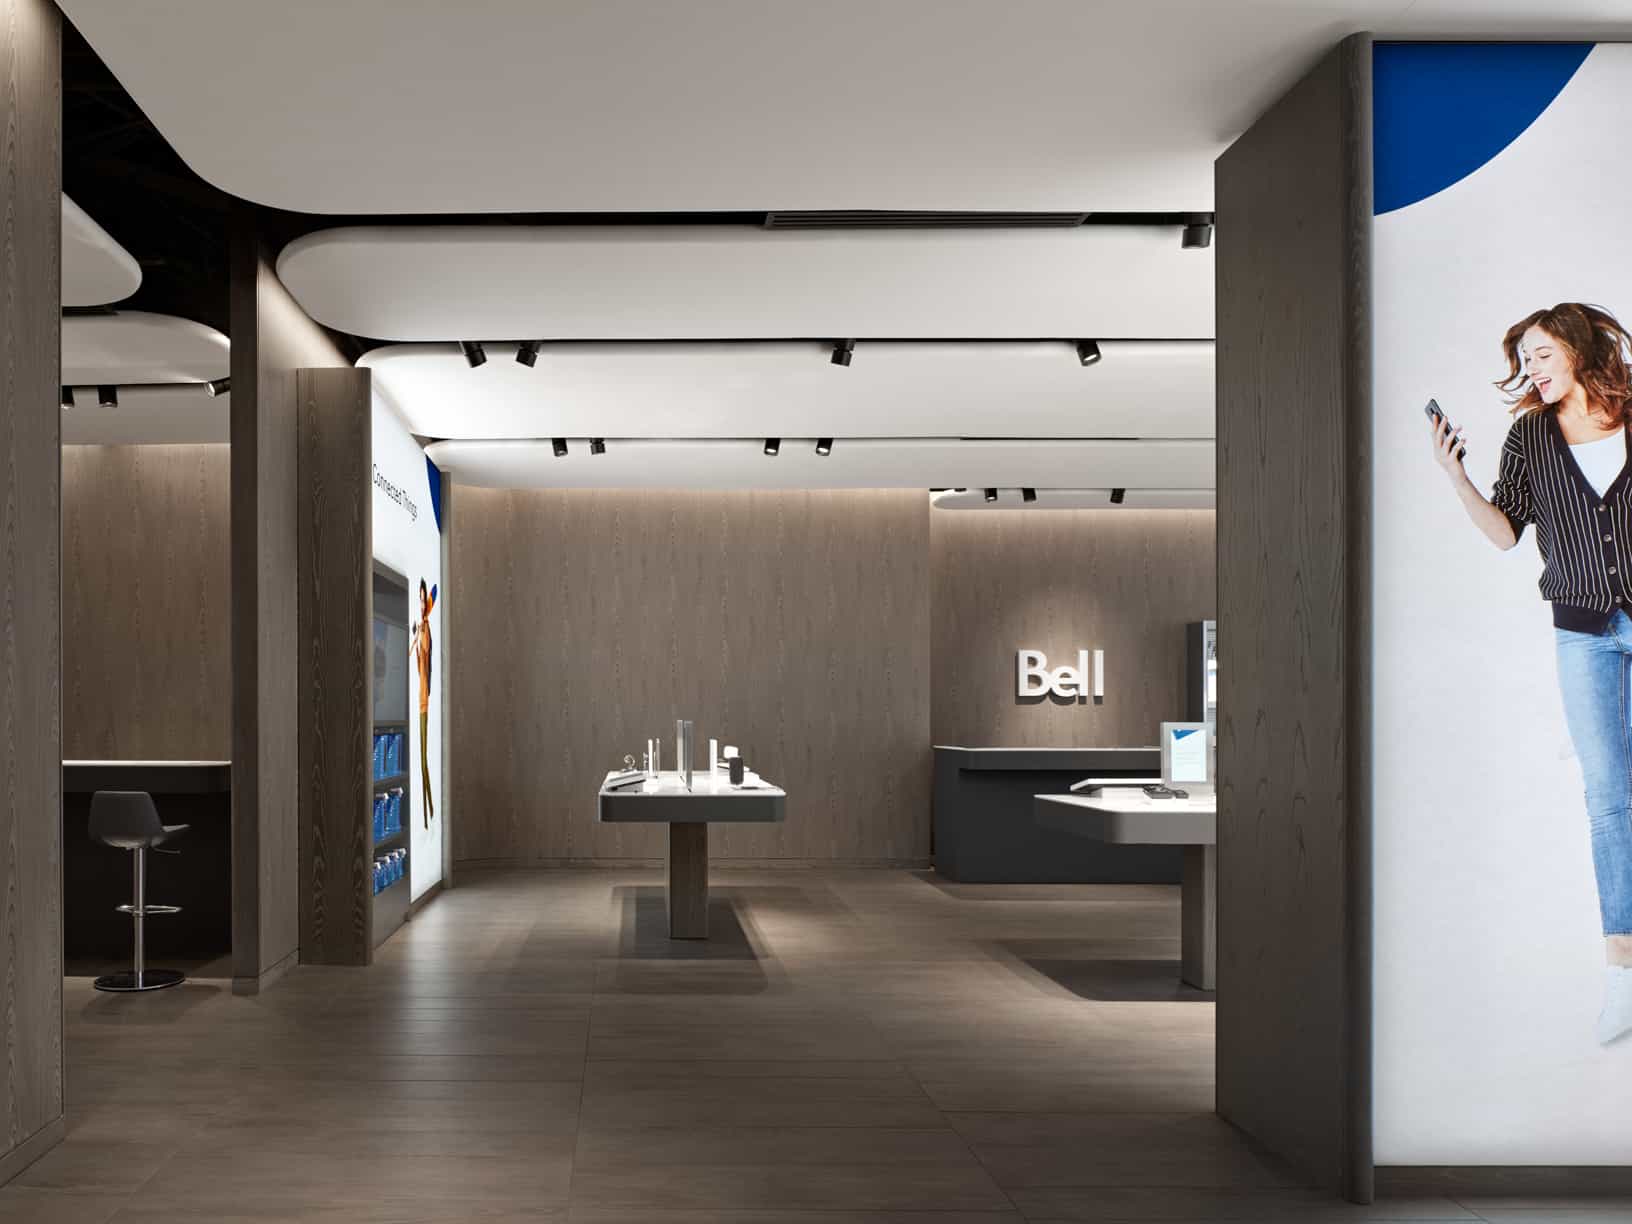 Bell Canada Launches ‘Next-Gen’ Retail Experience Designed by Award-Winning Firm